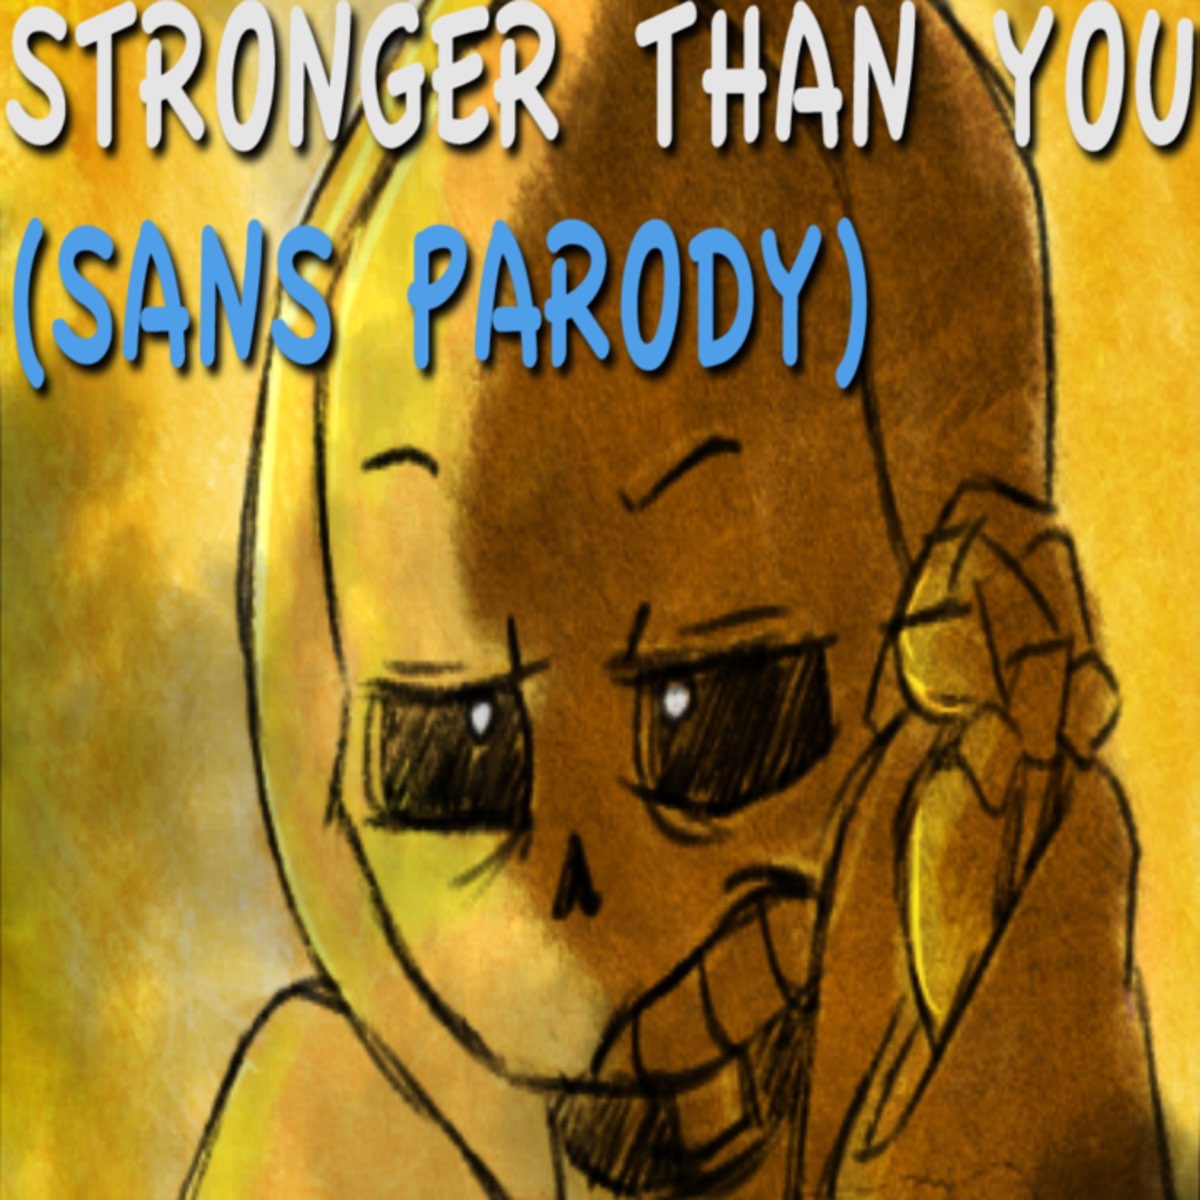 Stronger than you cover. Stronger than you Sans. Stronger than you (Sans Version). Undertale stronger than you Sans text. Djsmell.